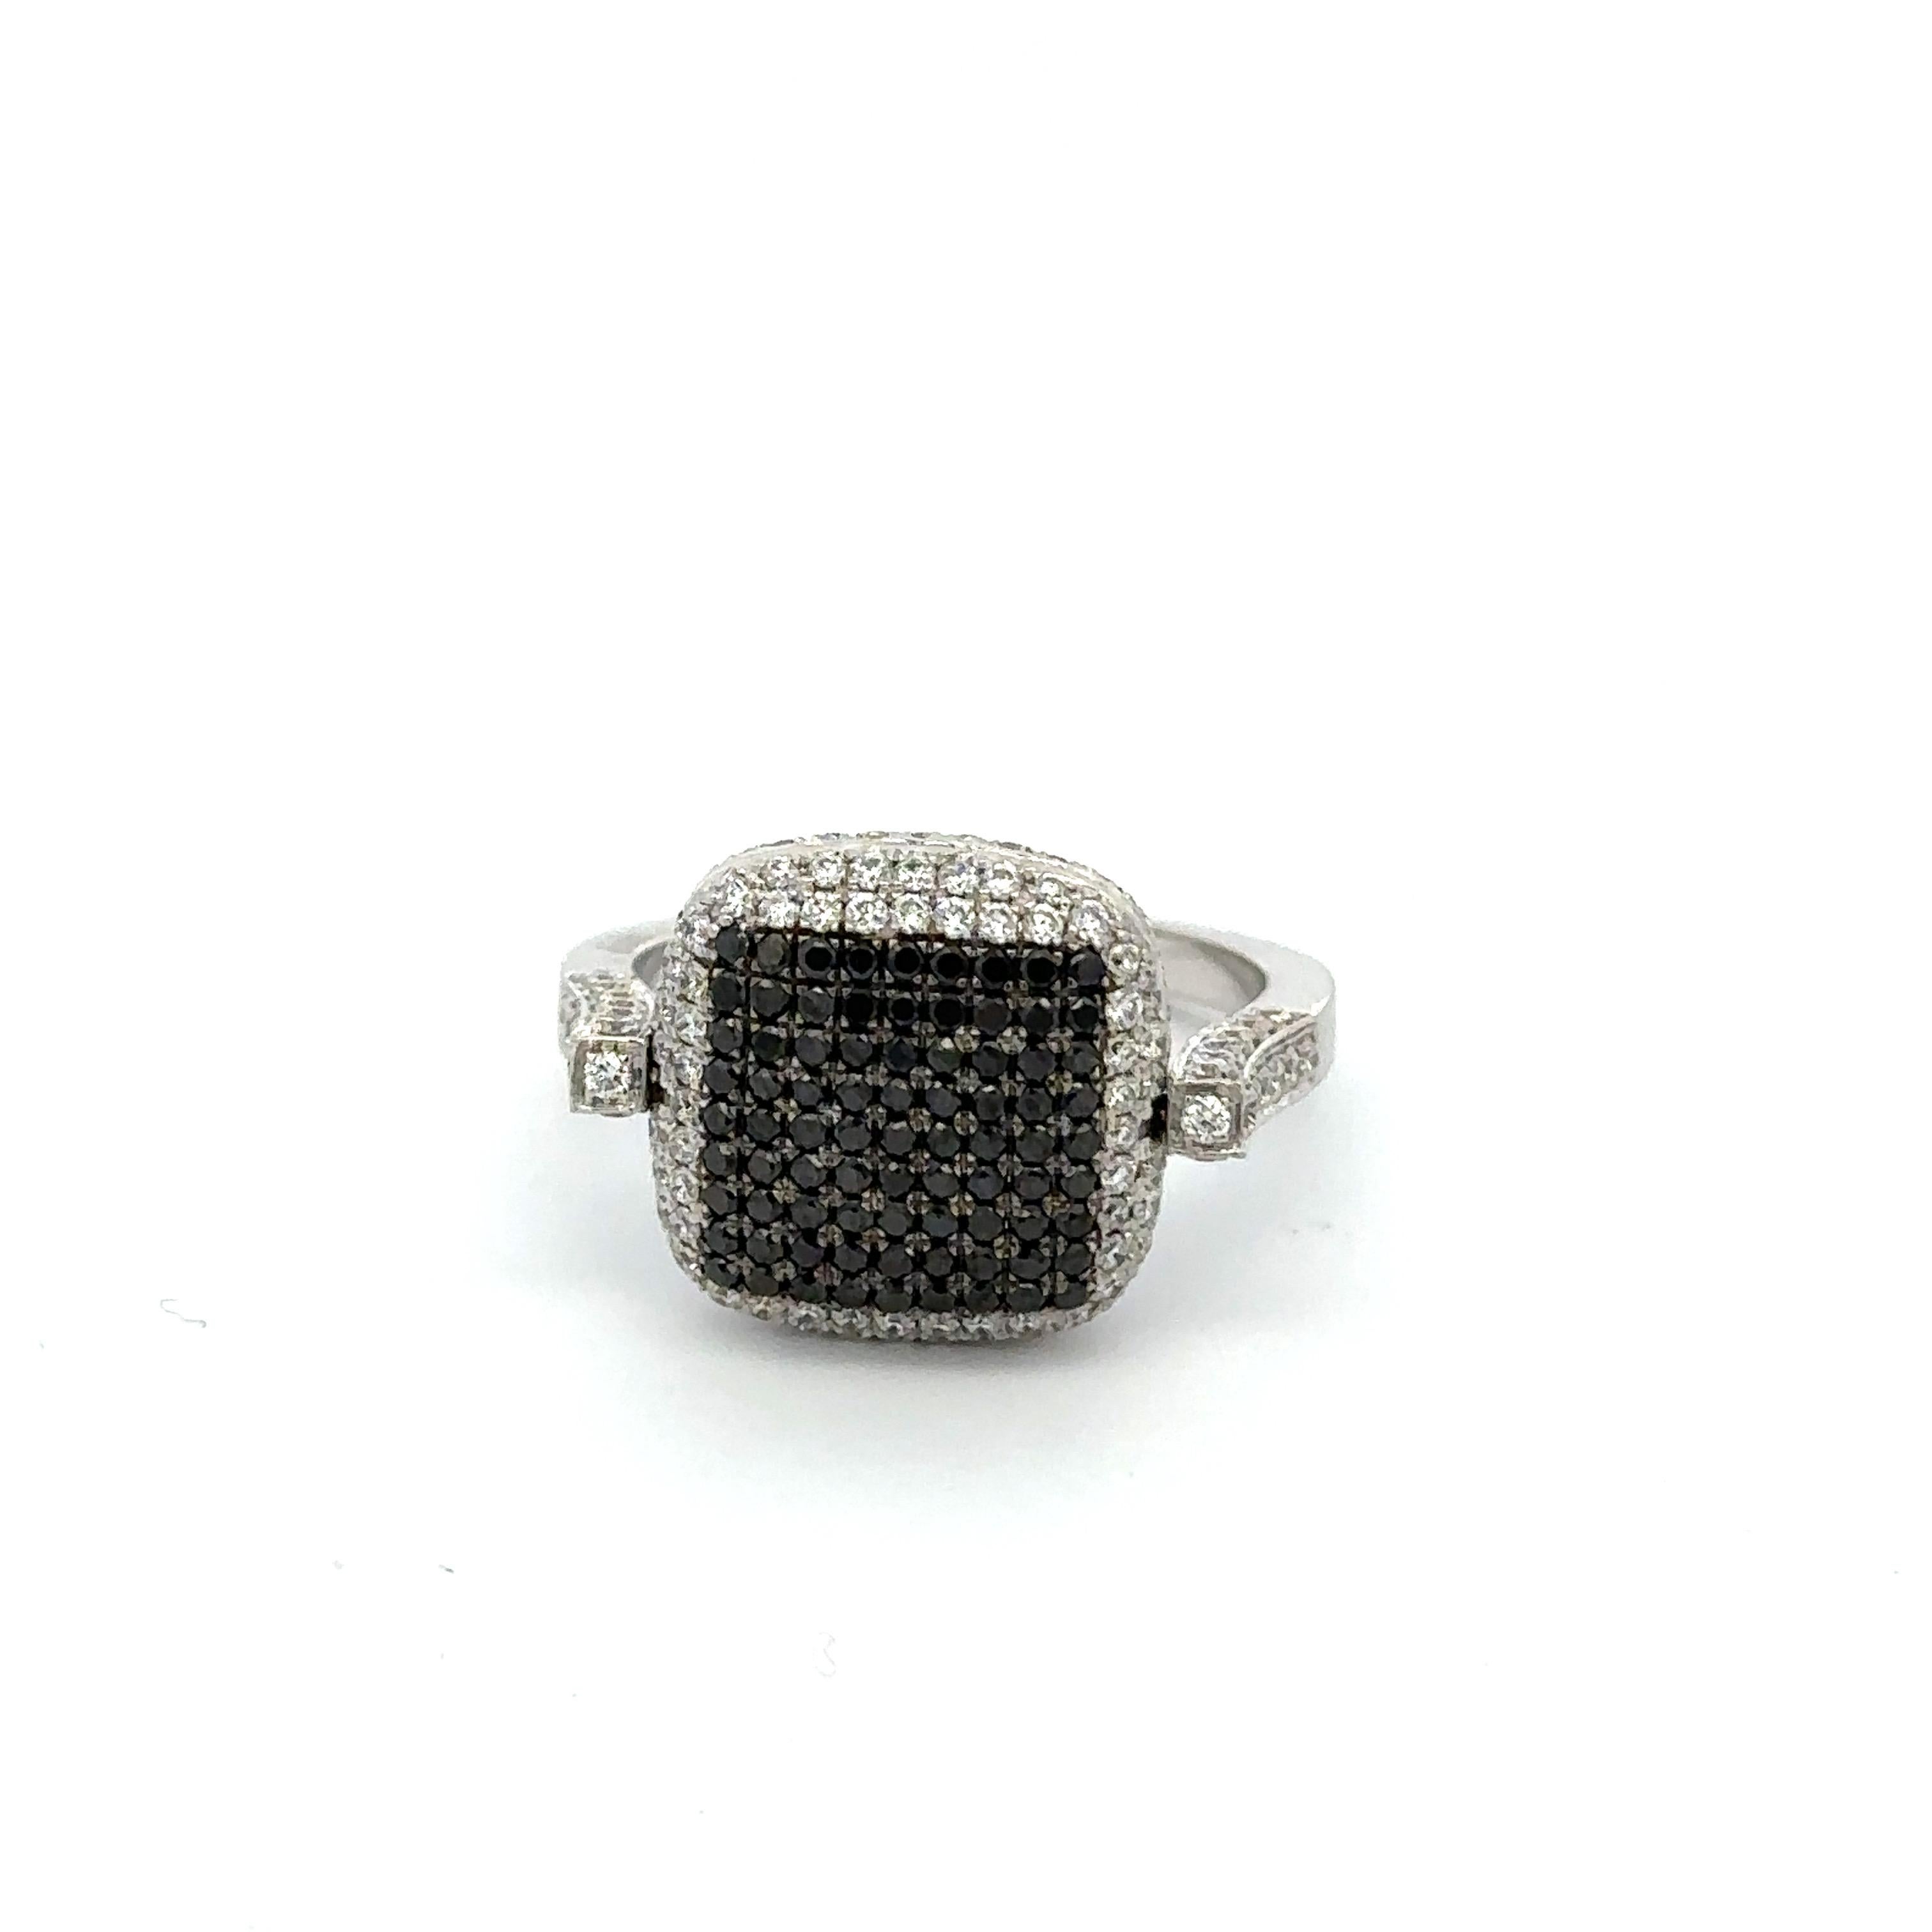 For Sale:  Unique Diamond Flip Ring in 18k Solid White Gold, Fine Jewelry for Him  6